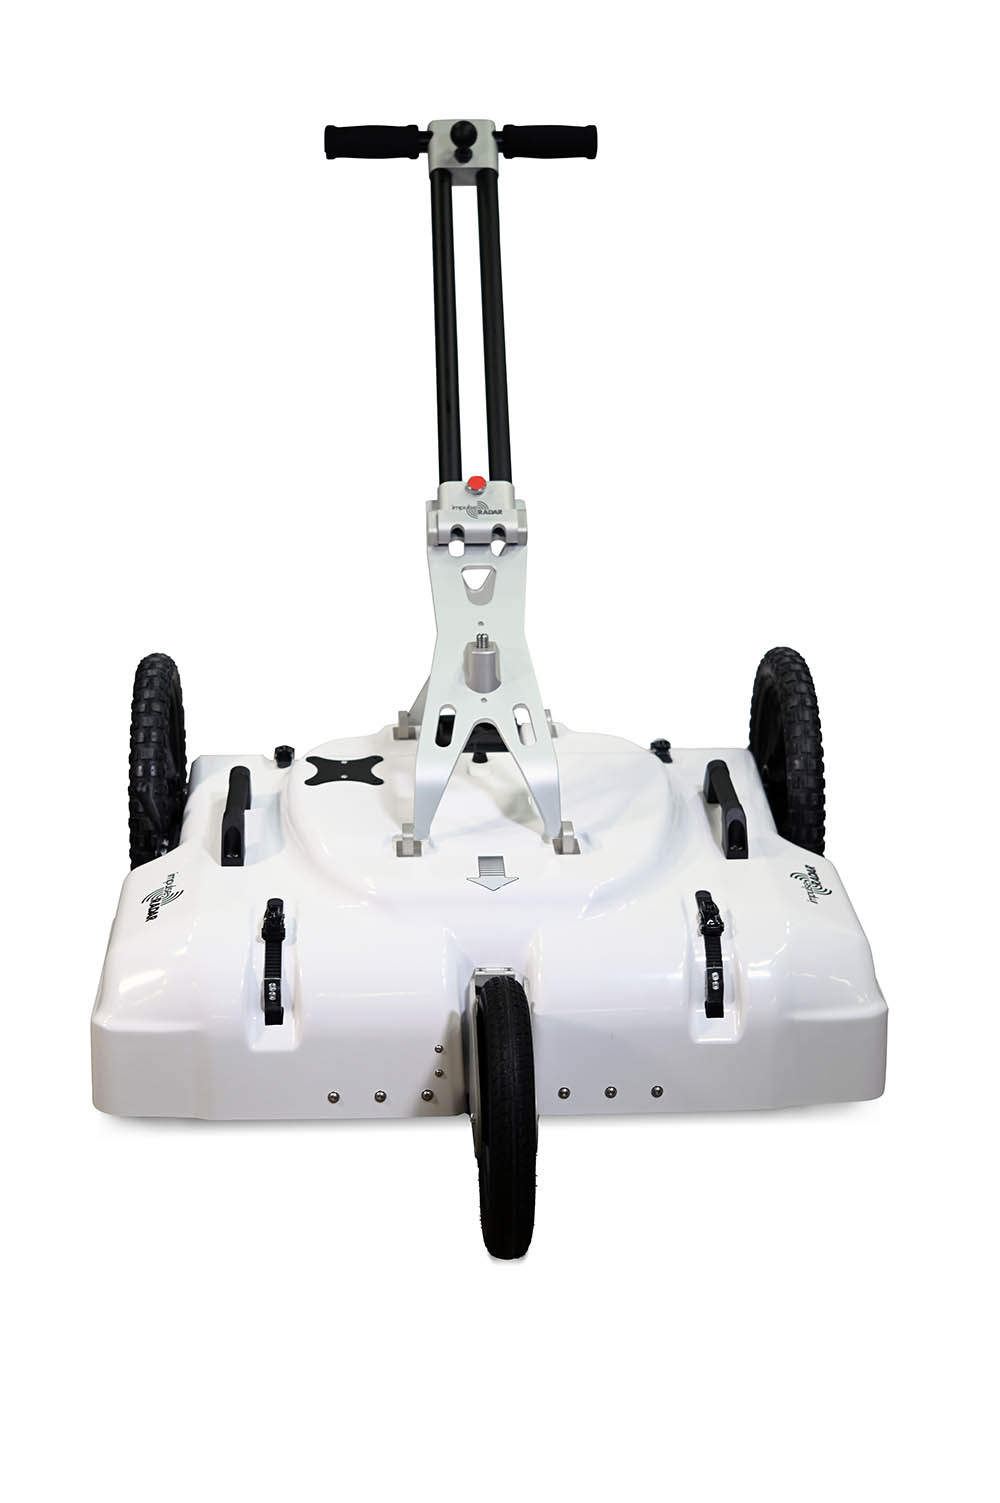 Front image of the ground penetrating radar with three wheels